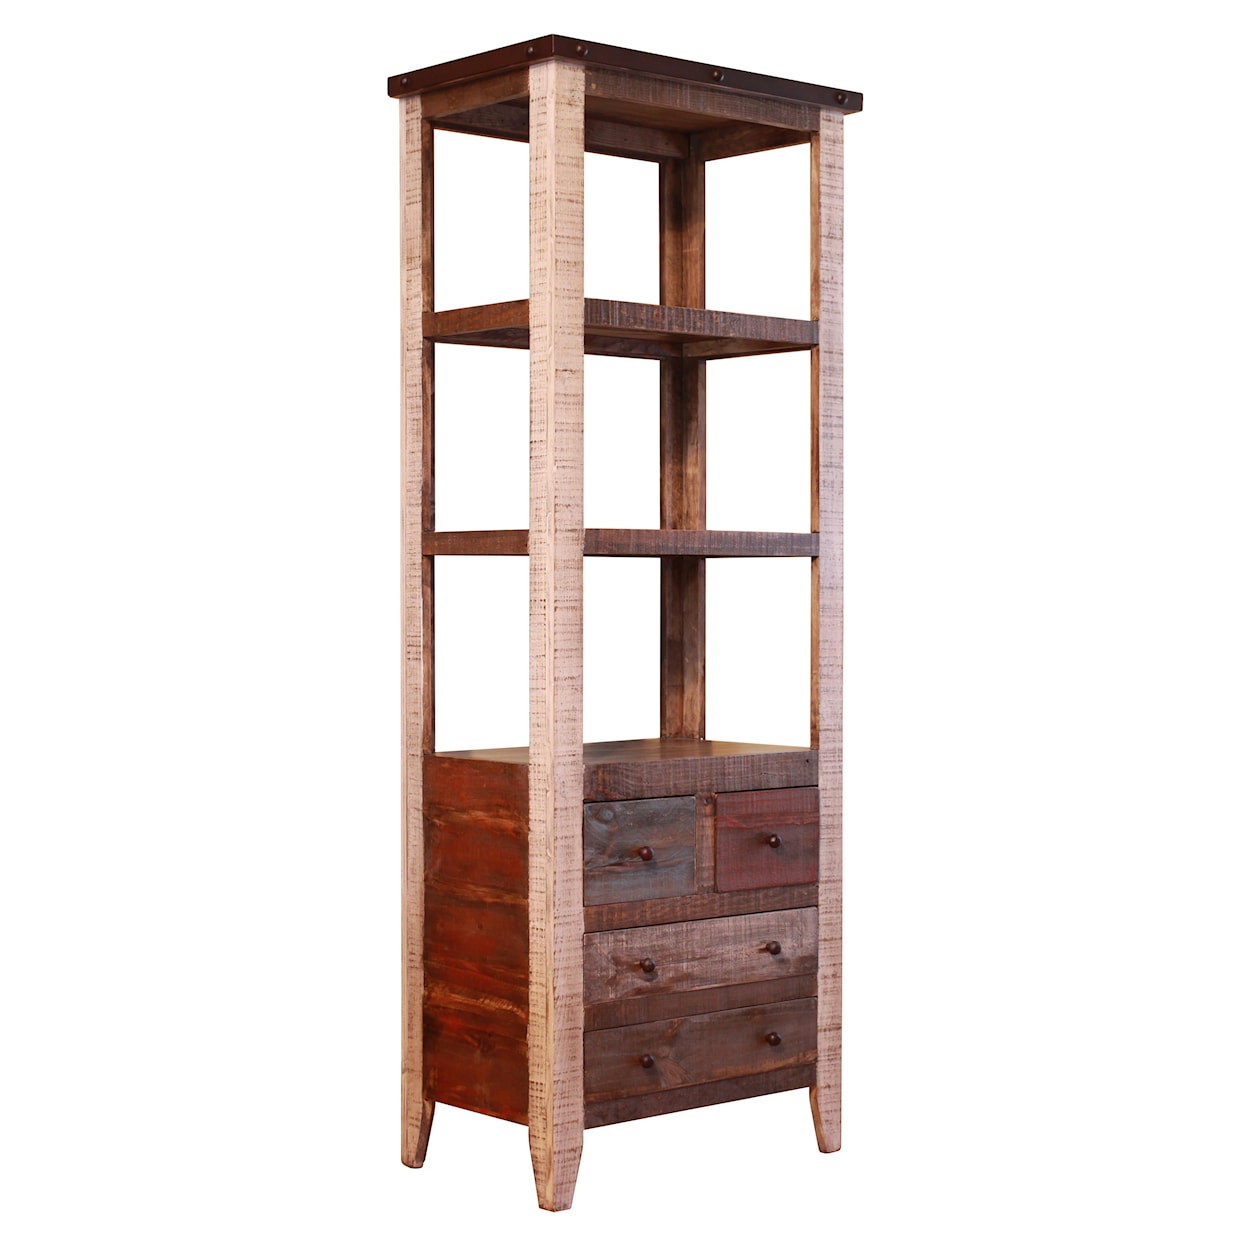 IFD International Furniture Direct 900 Antique Pier with 4 Drawer and 3 Shelves